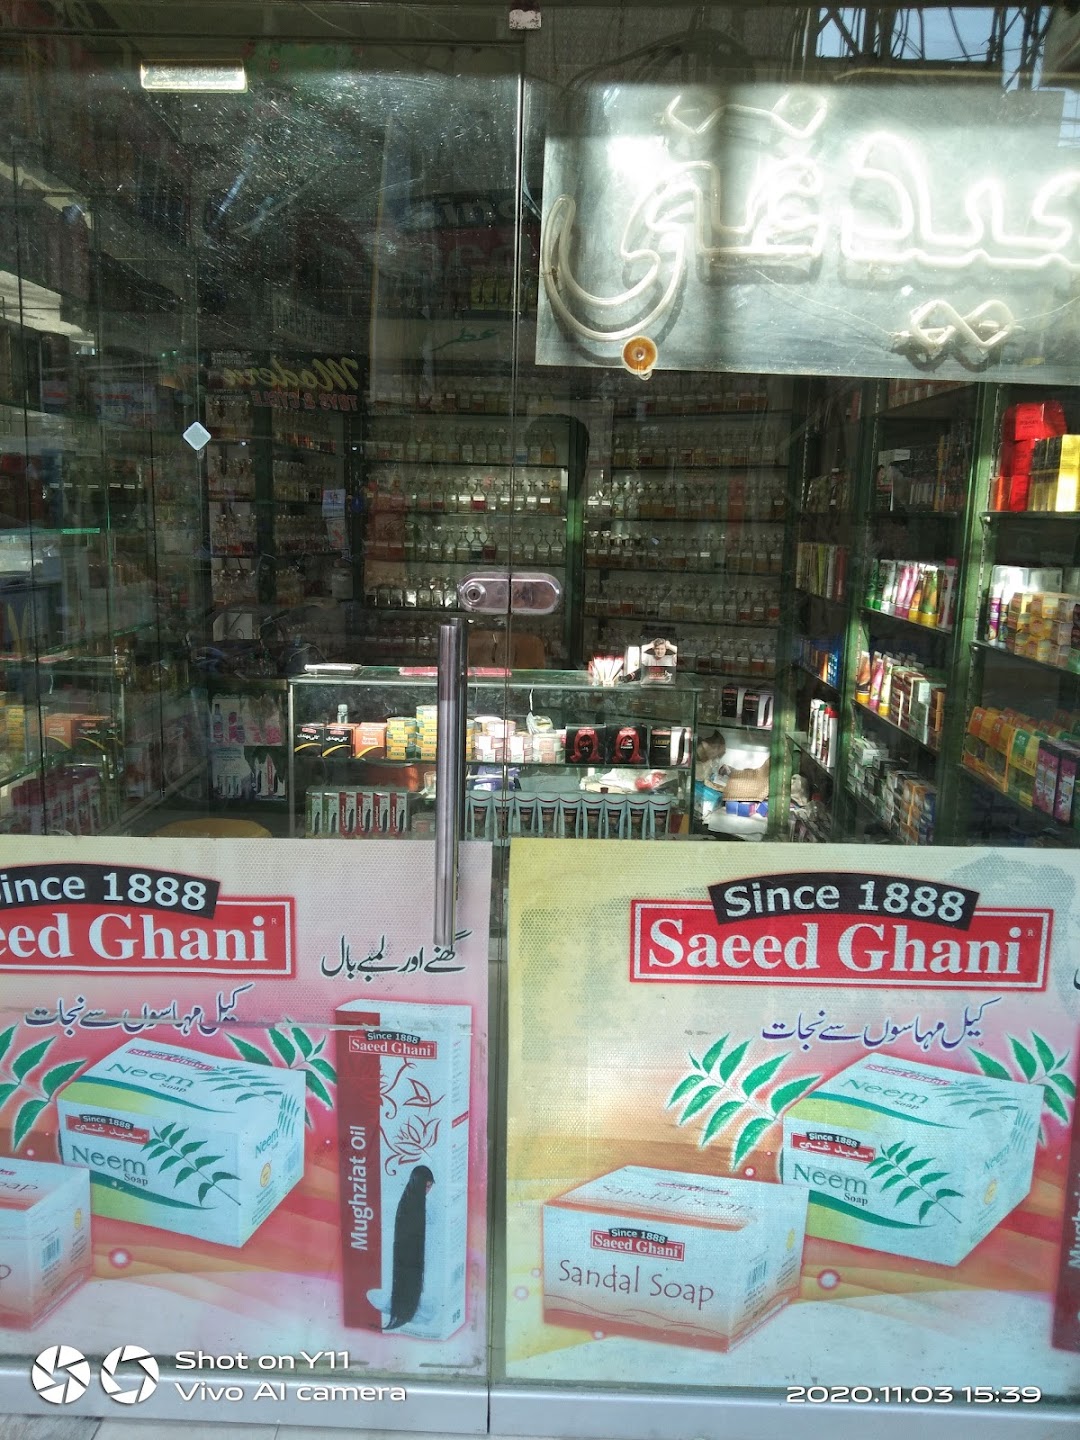 Saeed Ghani outlet